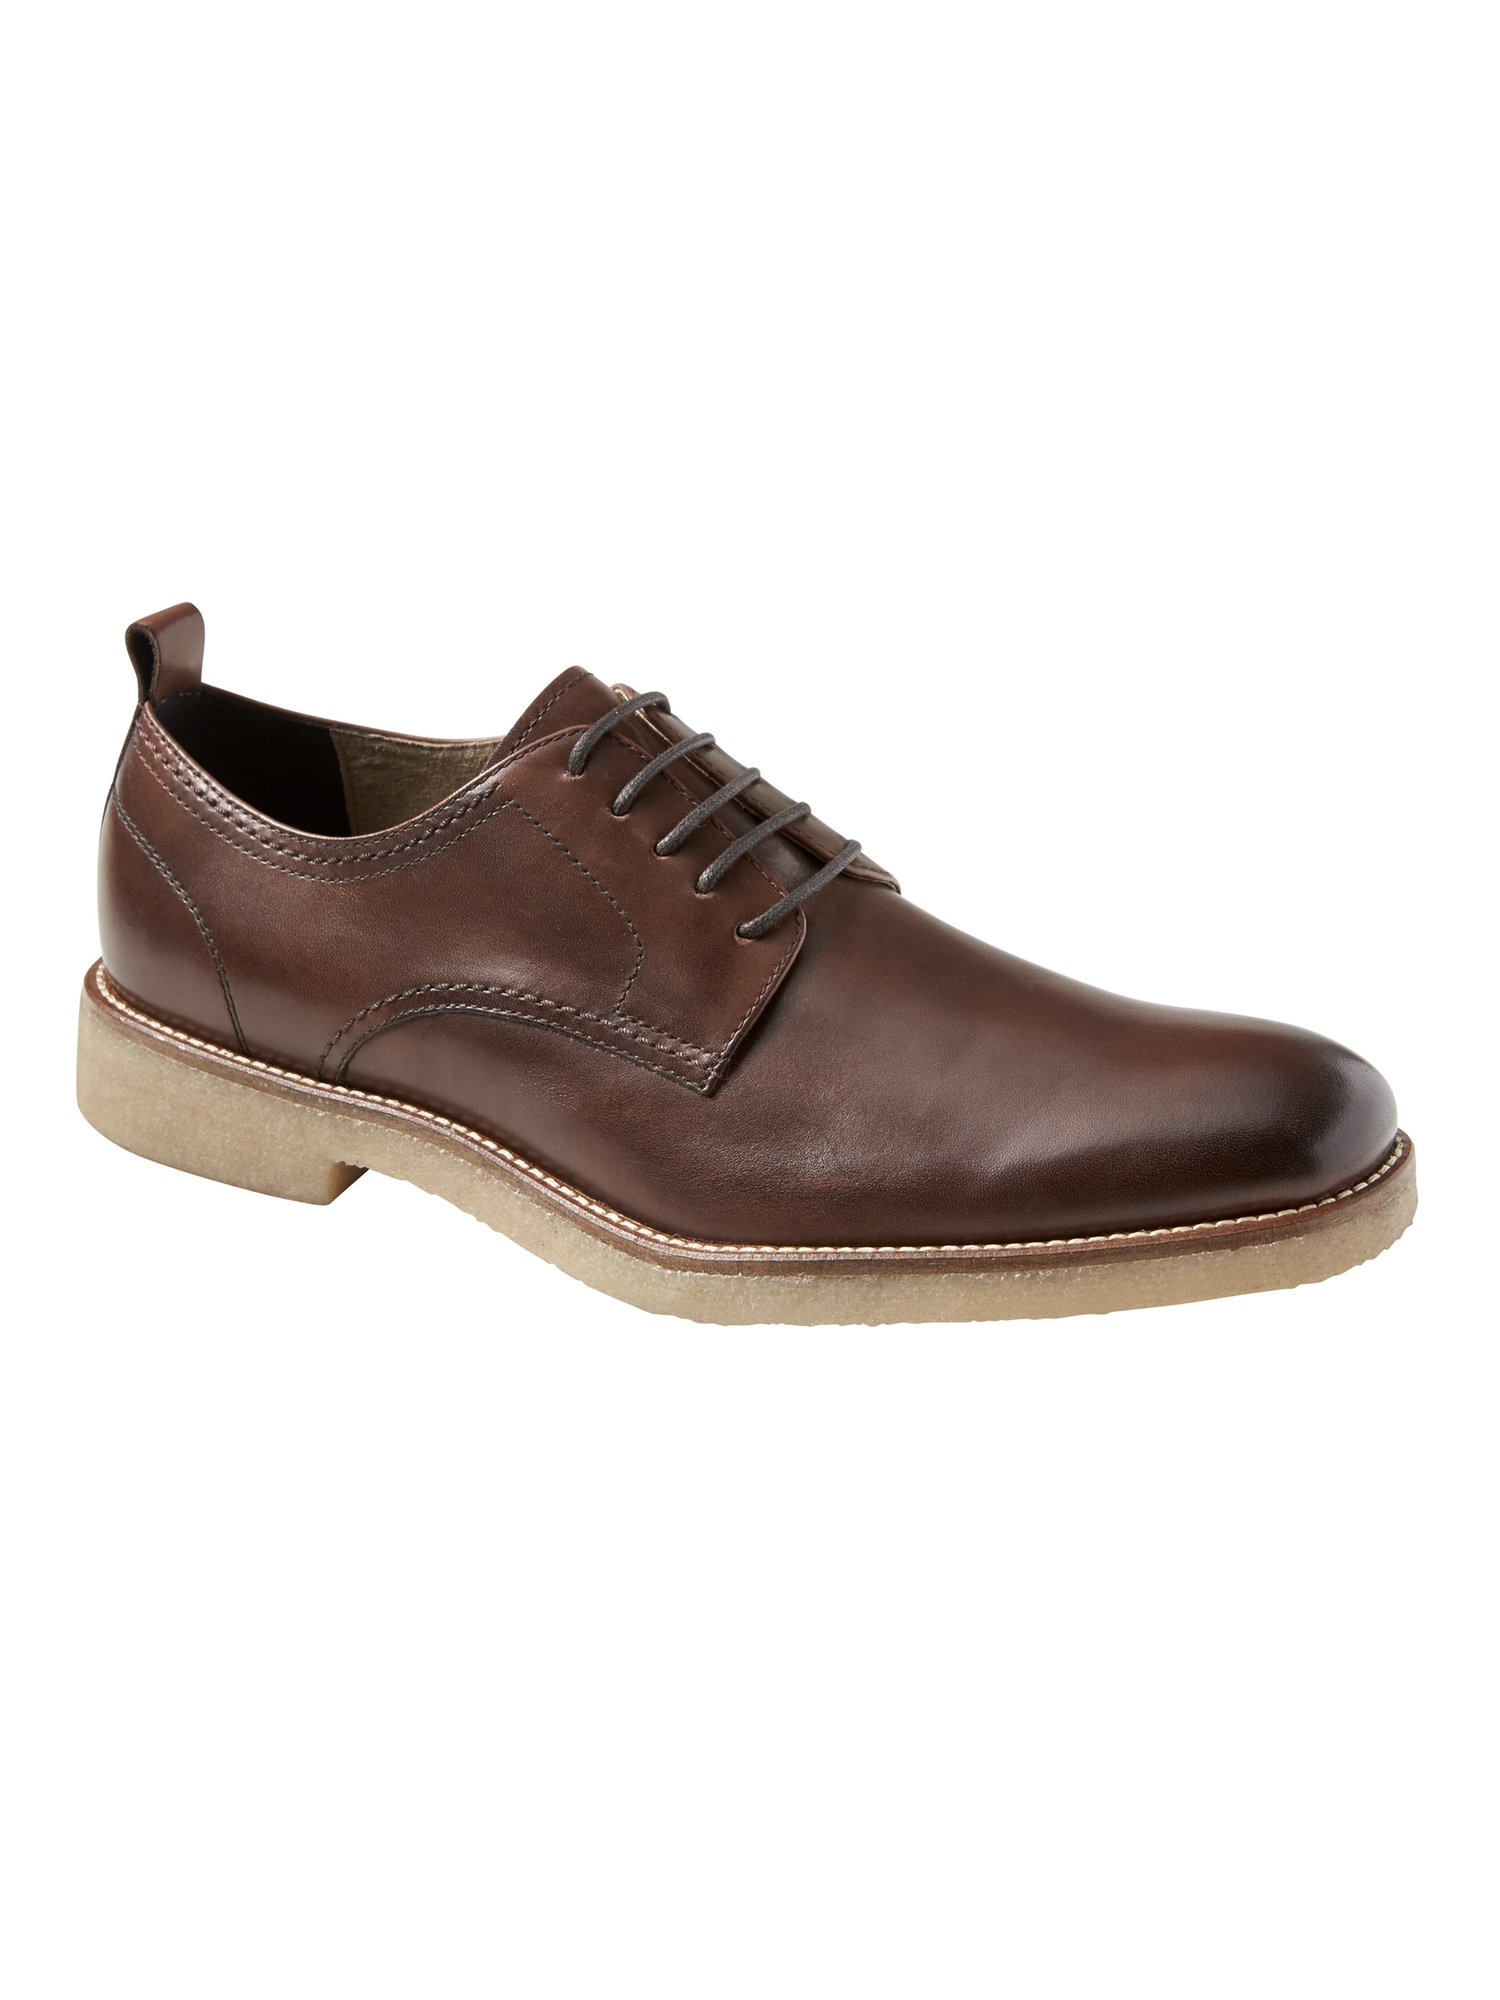 Dewitt Leather Crepe-Sole Oxford